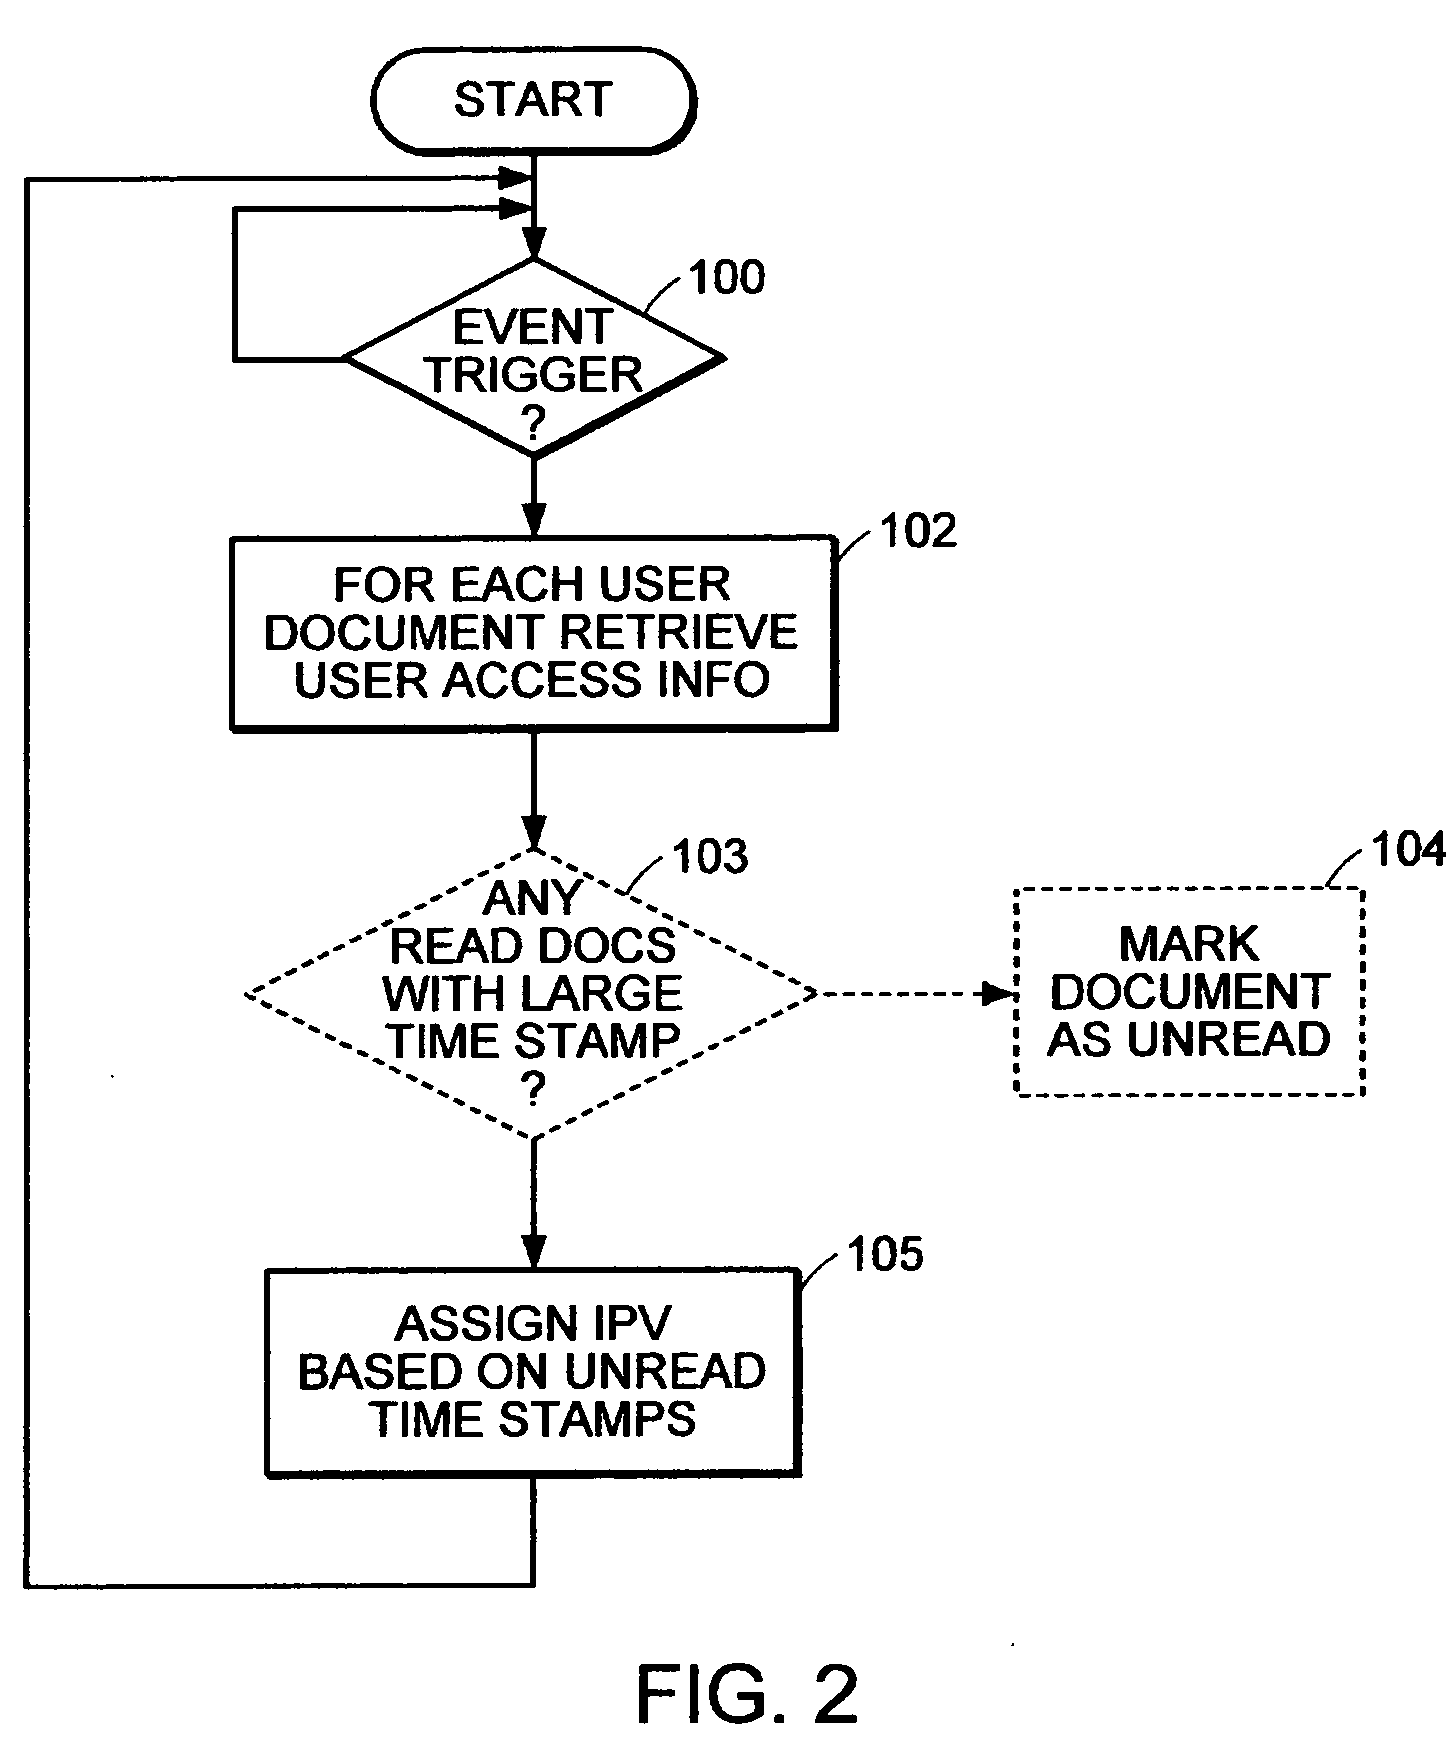 Method and apparatus for representing an interest priority of an object to a user based on personal histories or social context